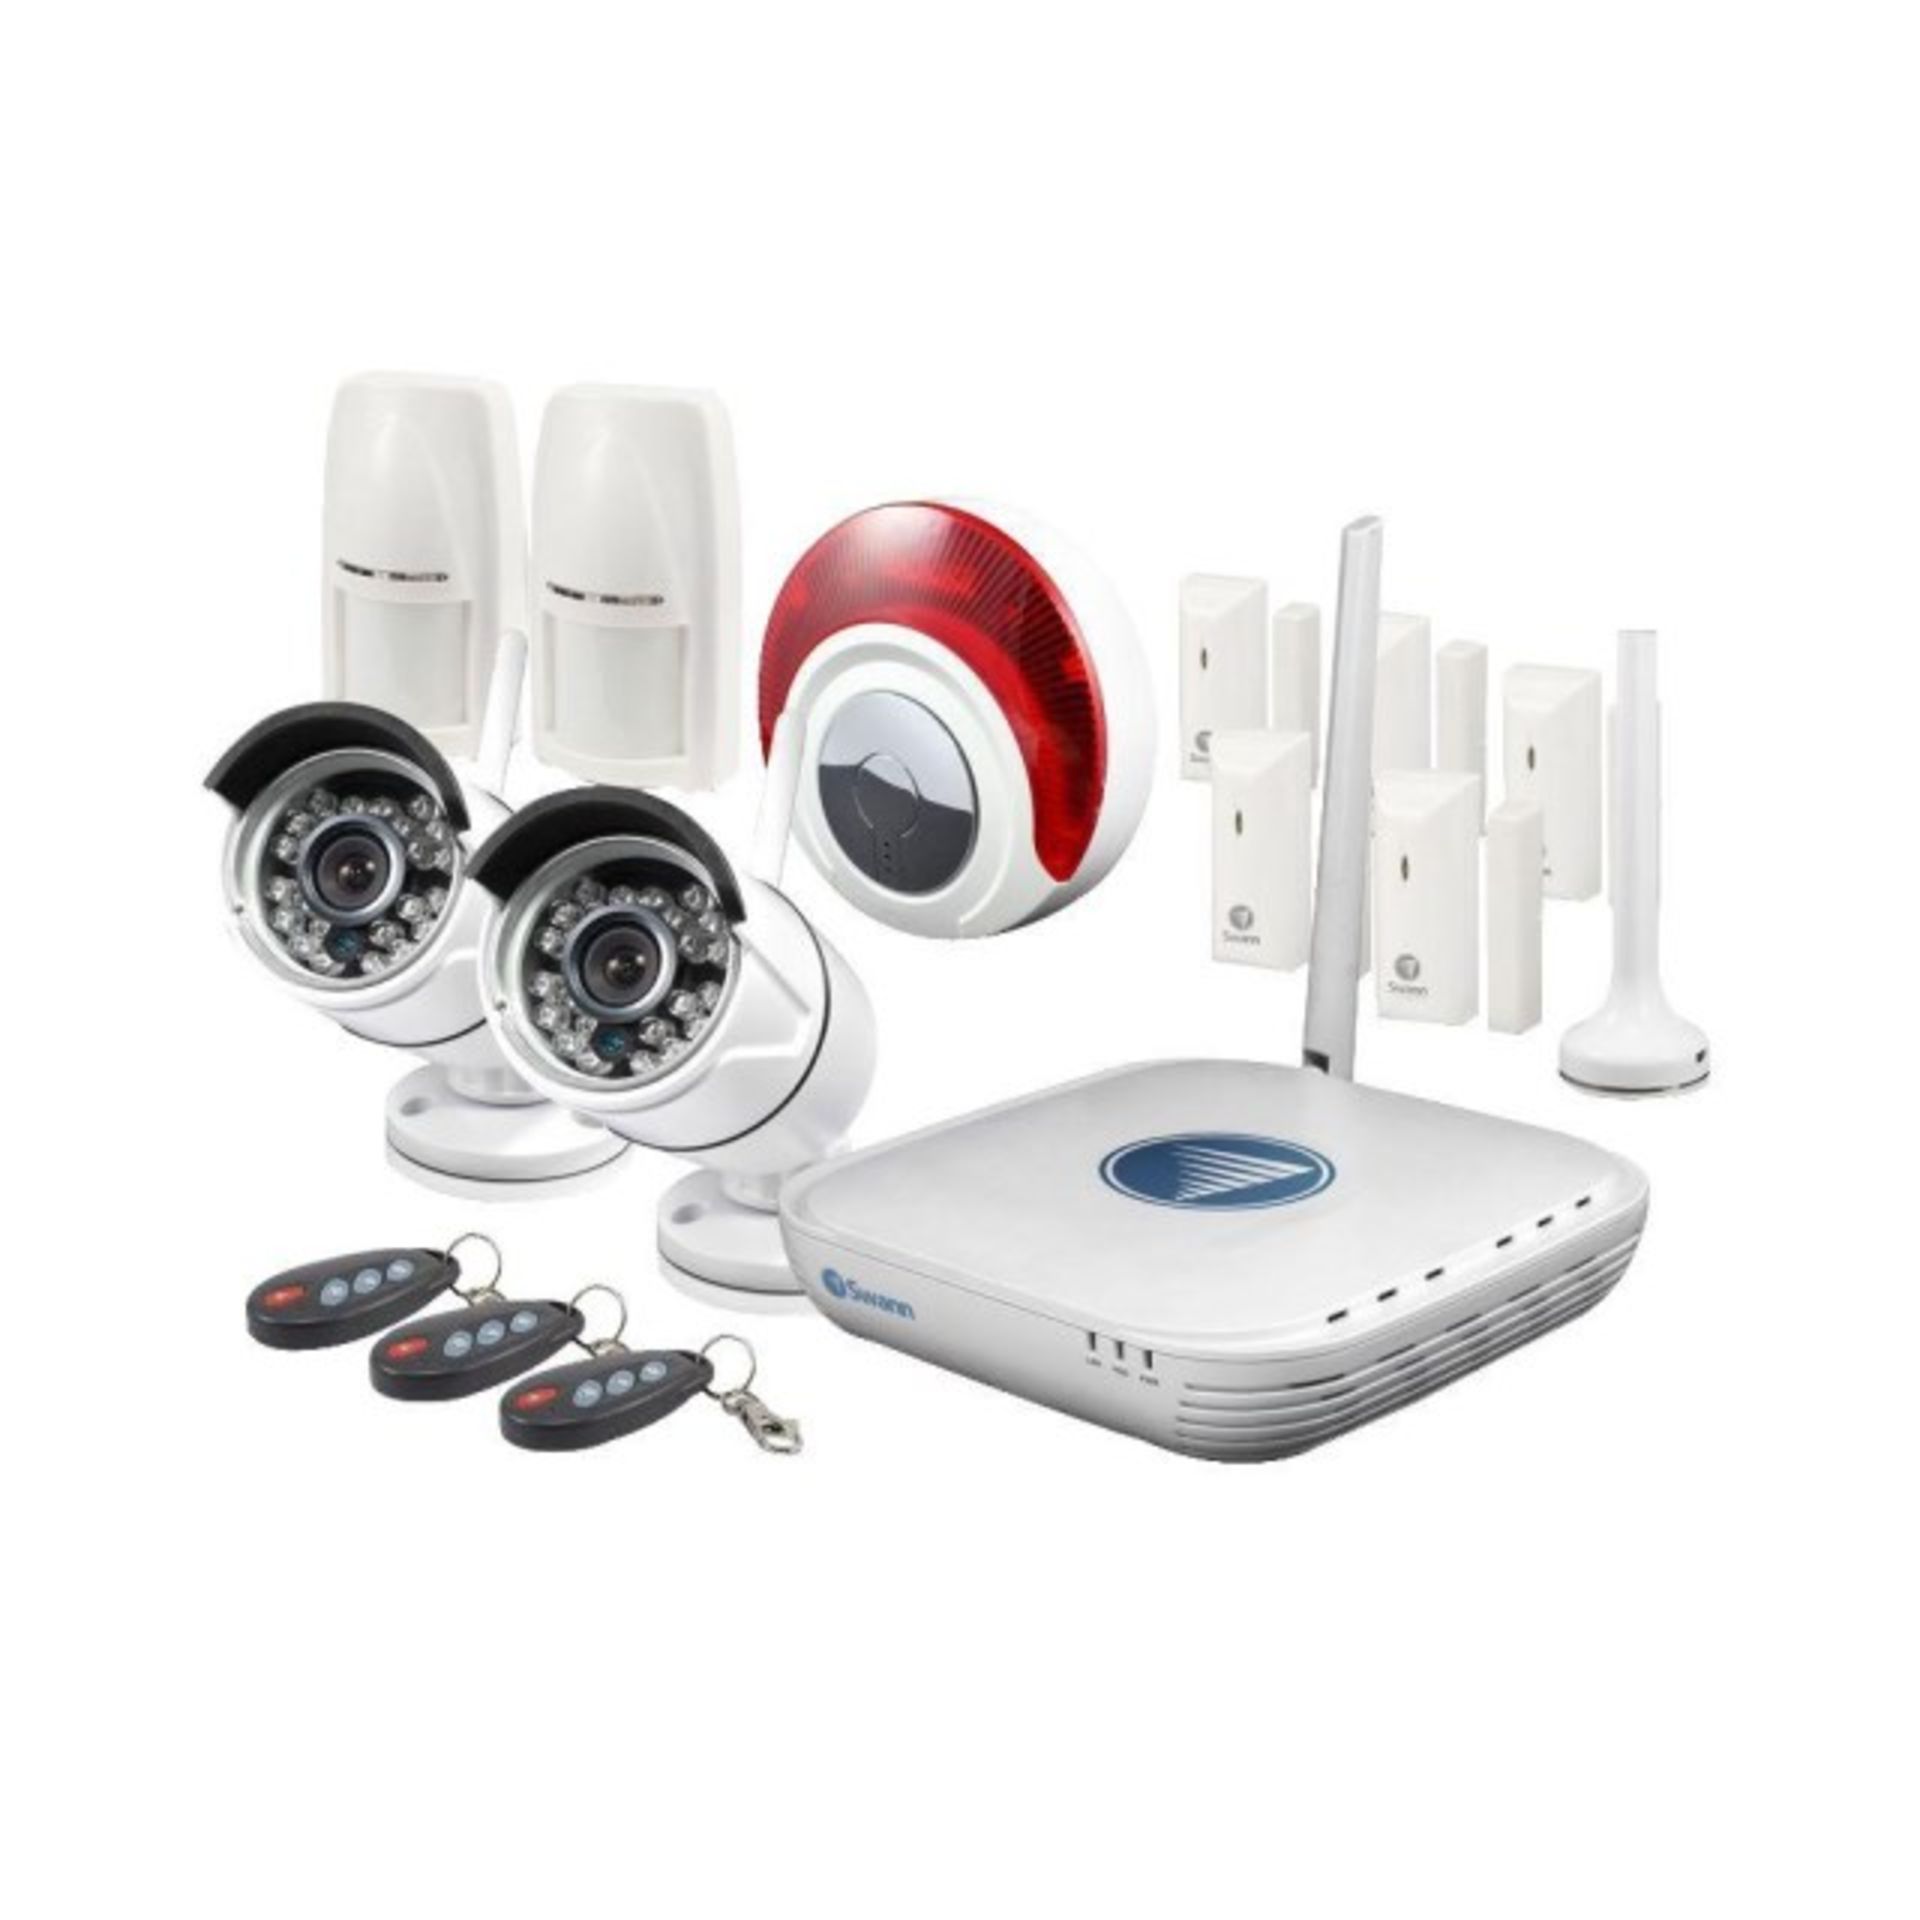 V Brand New Swann HD Micro Wifi Video and Alarm Security Kit (Screwfix £499.99) Complete Wireless